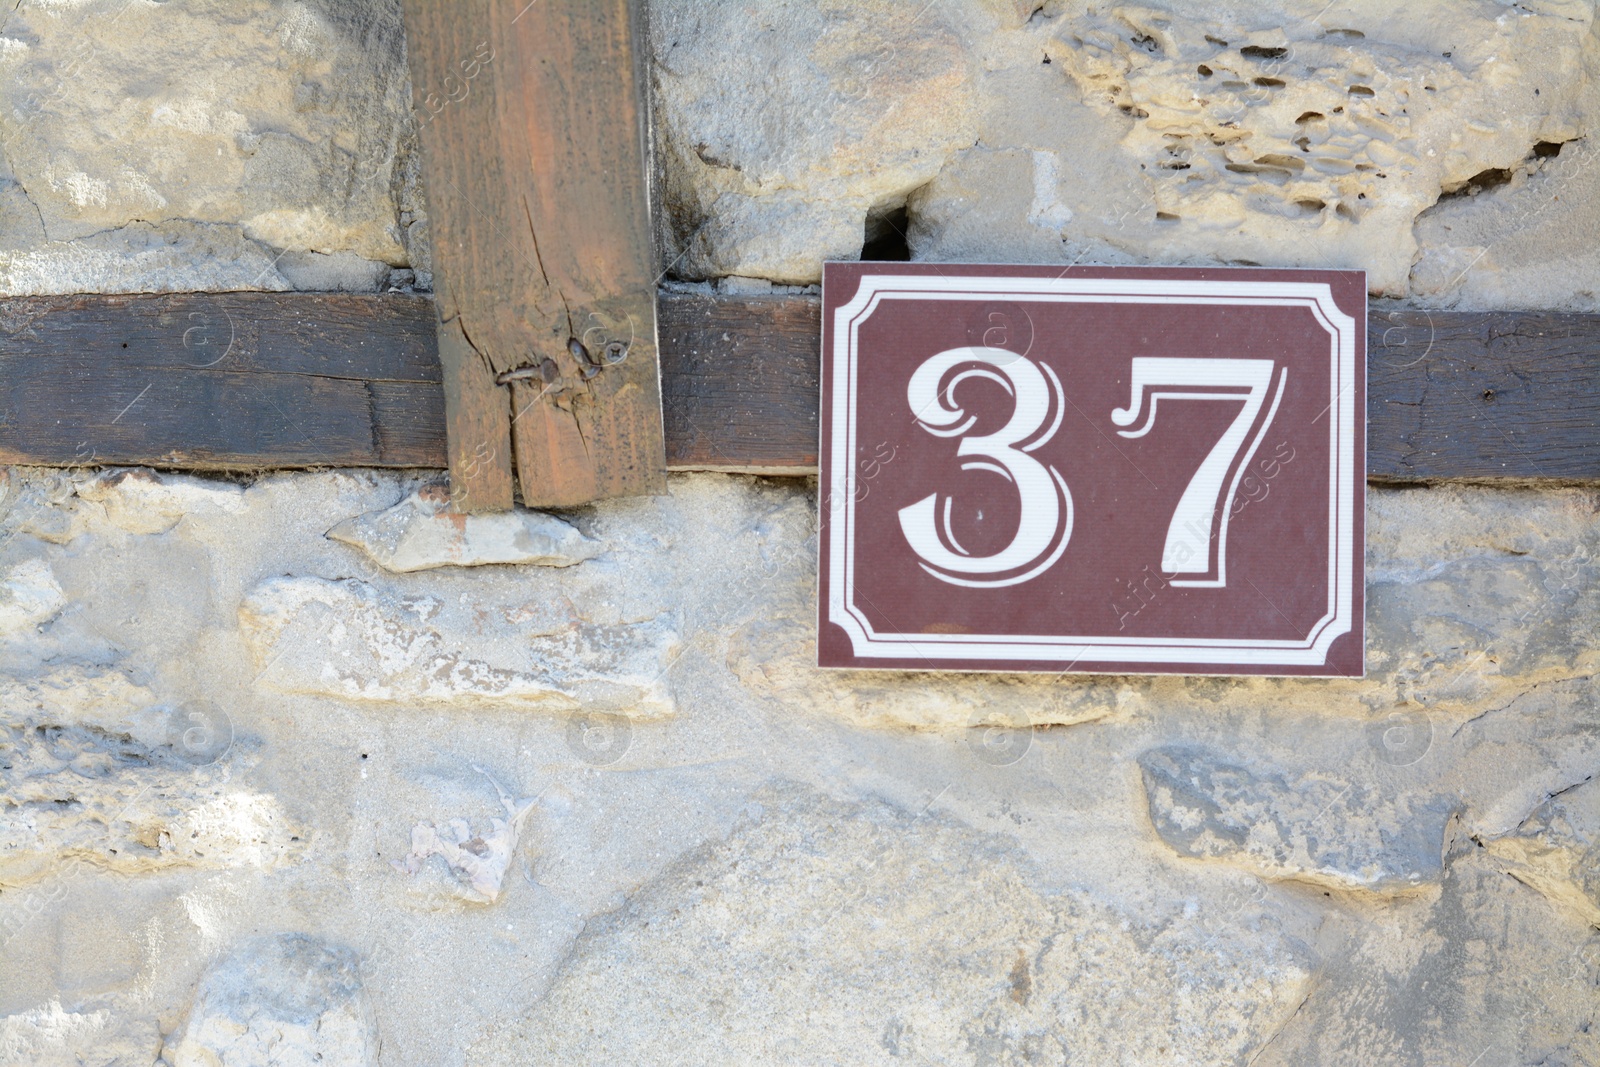 Photo of Plate with house number thirty seven on stone wall outdoors, closeup